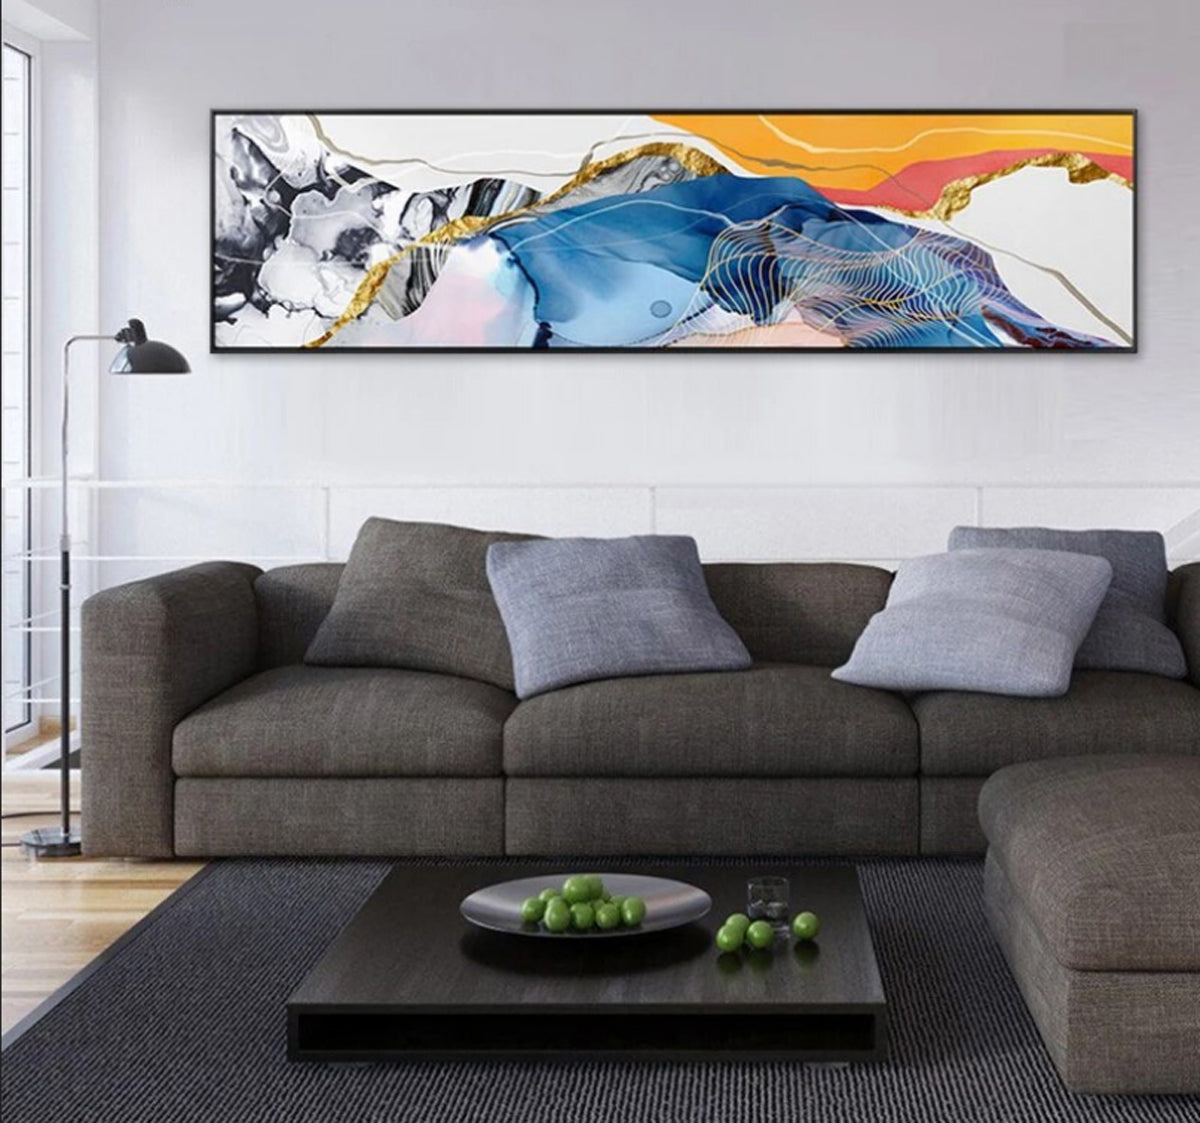 TPFLiving XXL giant luxury poster canvas widescreen format / abstract –  Traumpreisfabrik